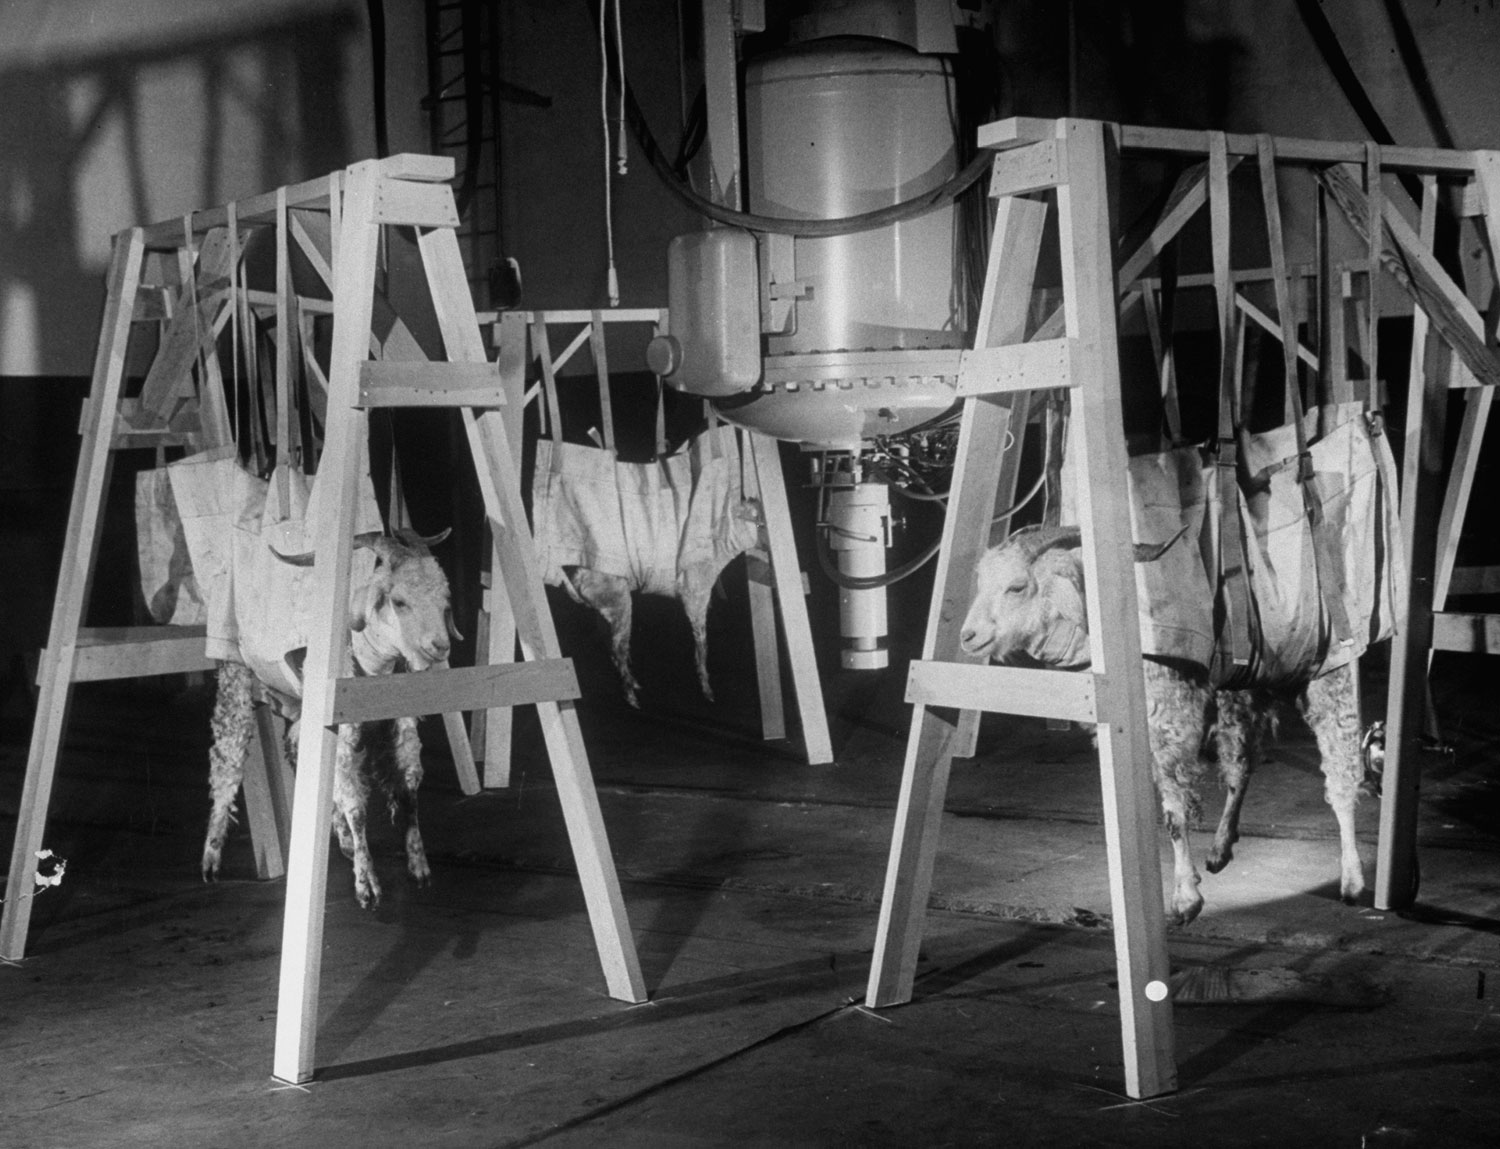 Sheep that survived an atom bomb test are studied for radiation poisoning, 1949.